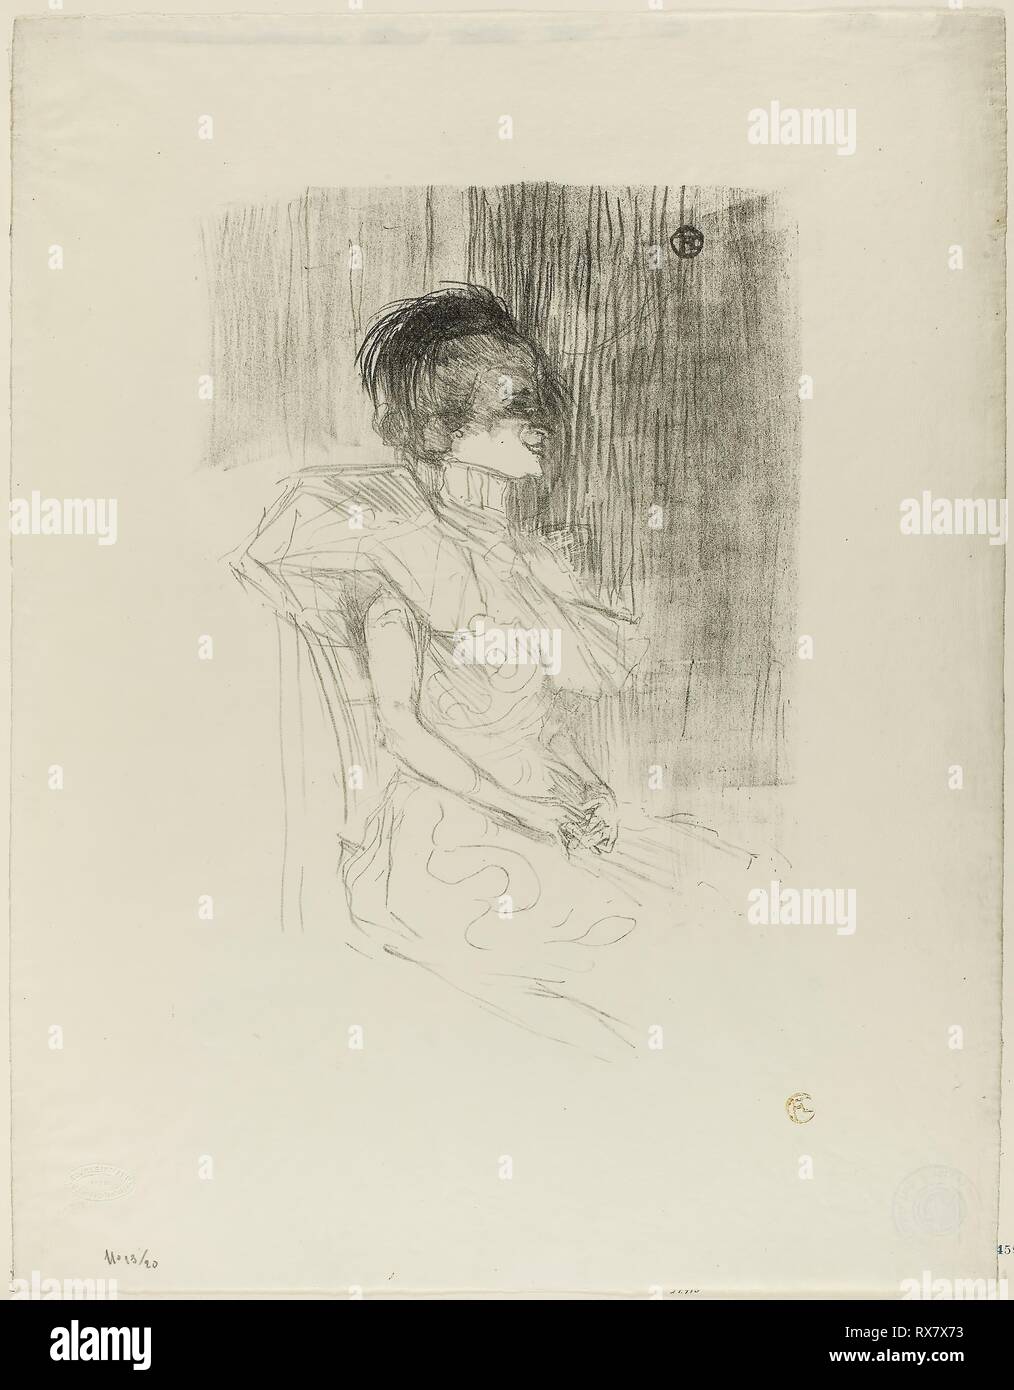 Lender Seated. Henri de Toulouse-Lautrec; French, 1864-1901. Date: 1895. Dimensions: 354 × 244 mm (image); 514 × 399 mm (sheet). Lithograph on ivory wove paper. Origin: France. Museum: The Chicago Art Institute. Stock Photo